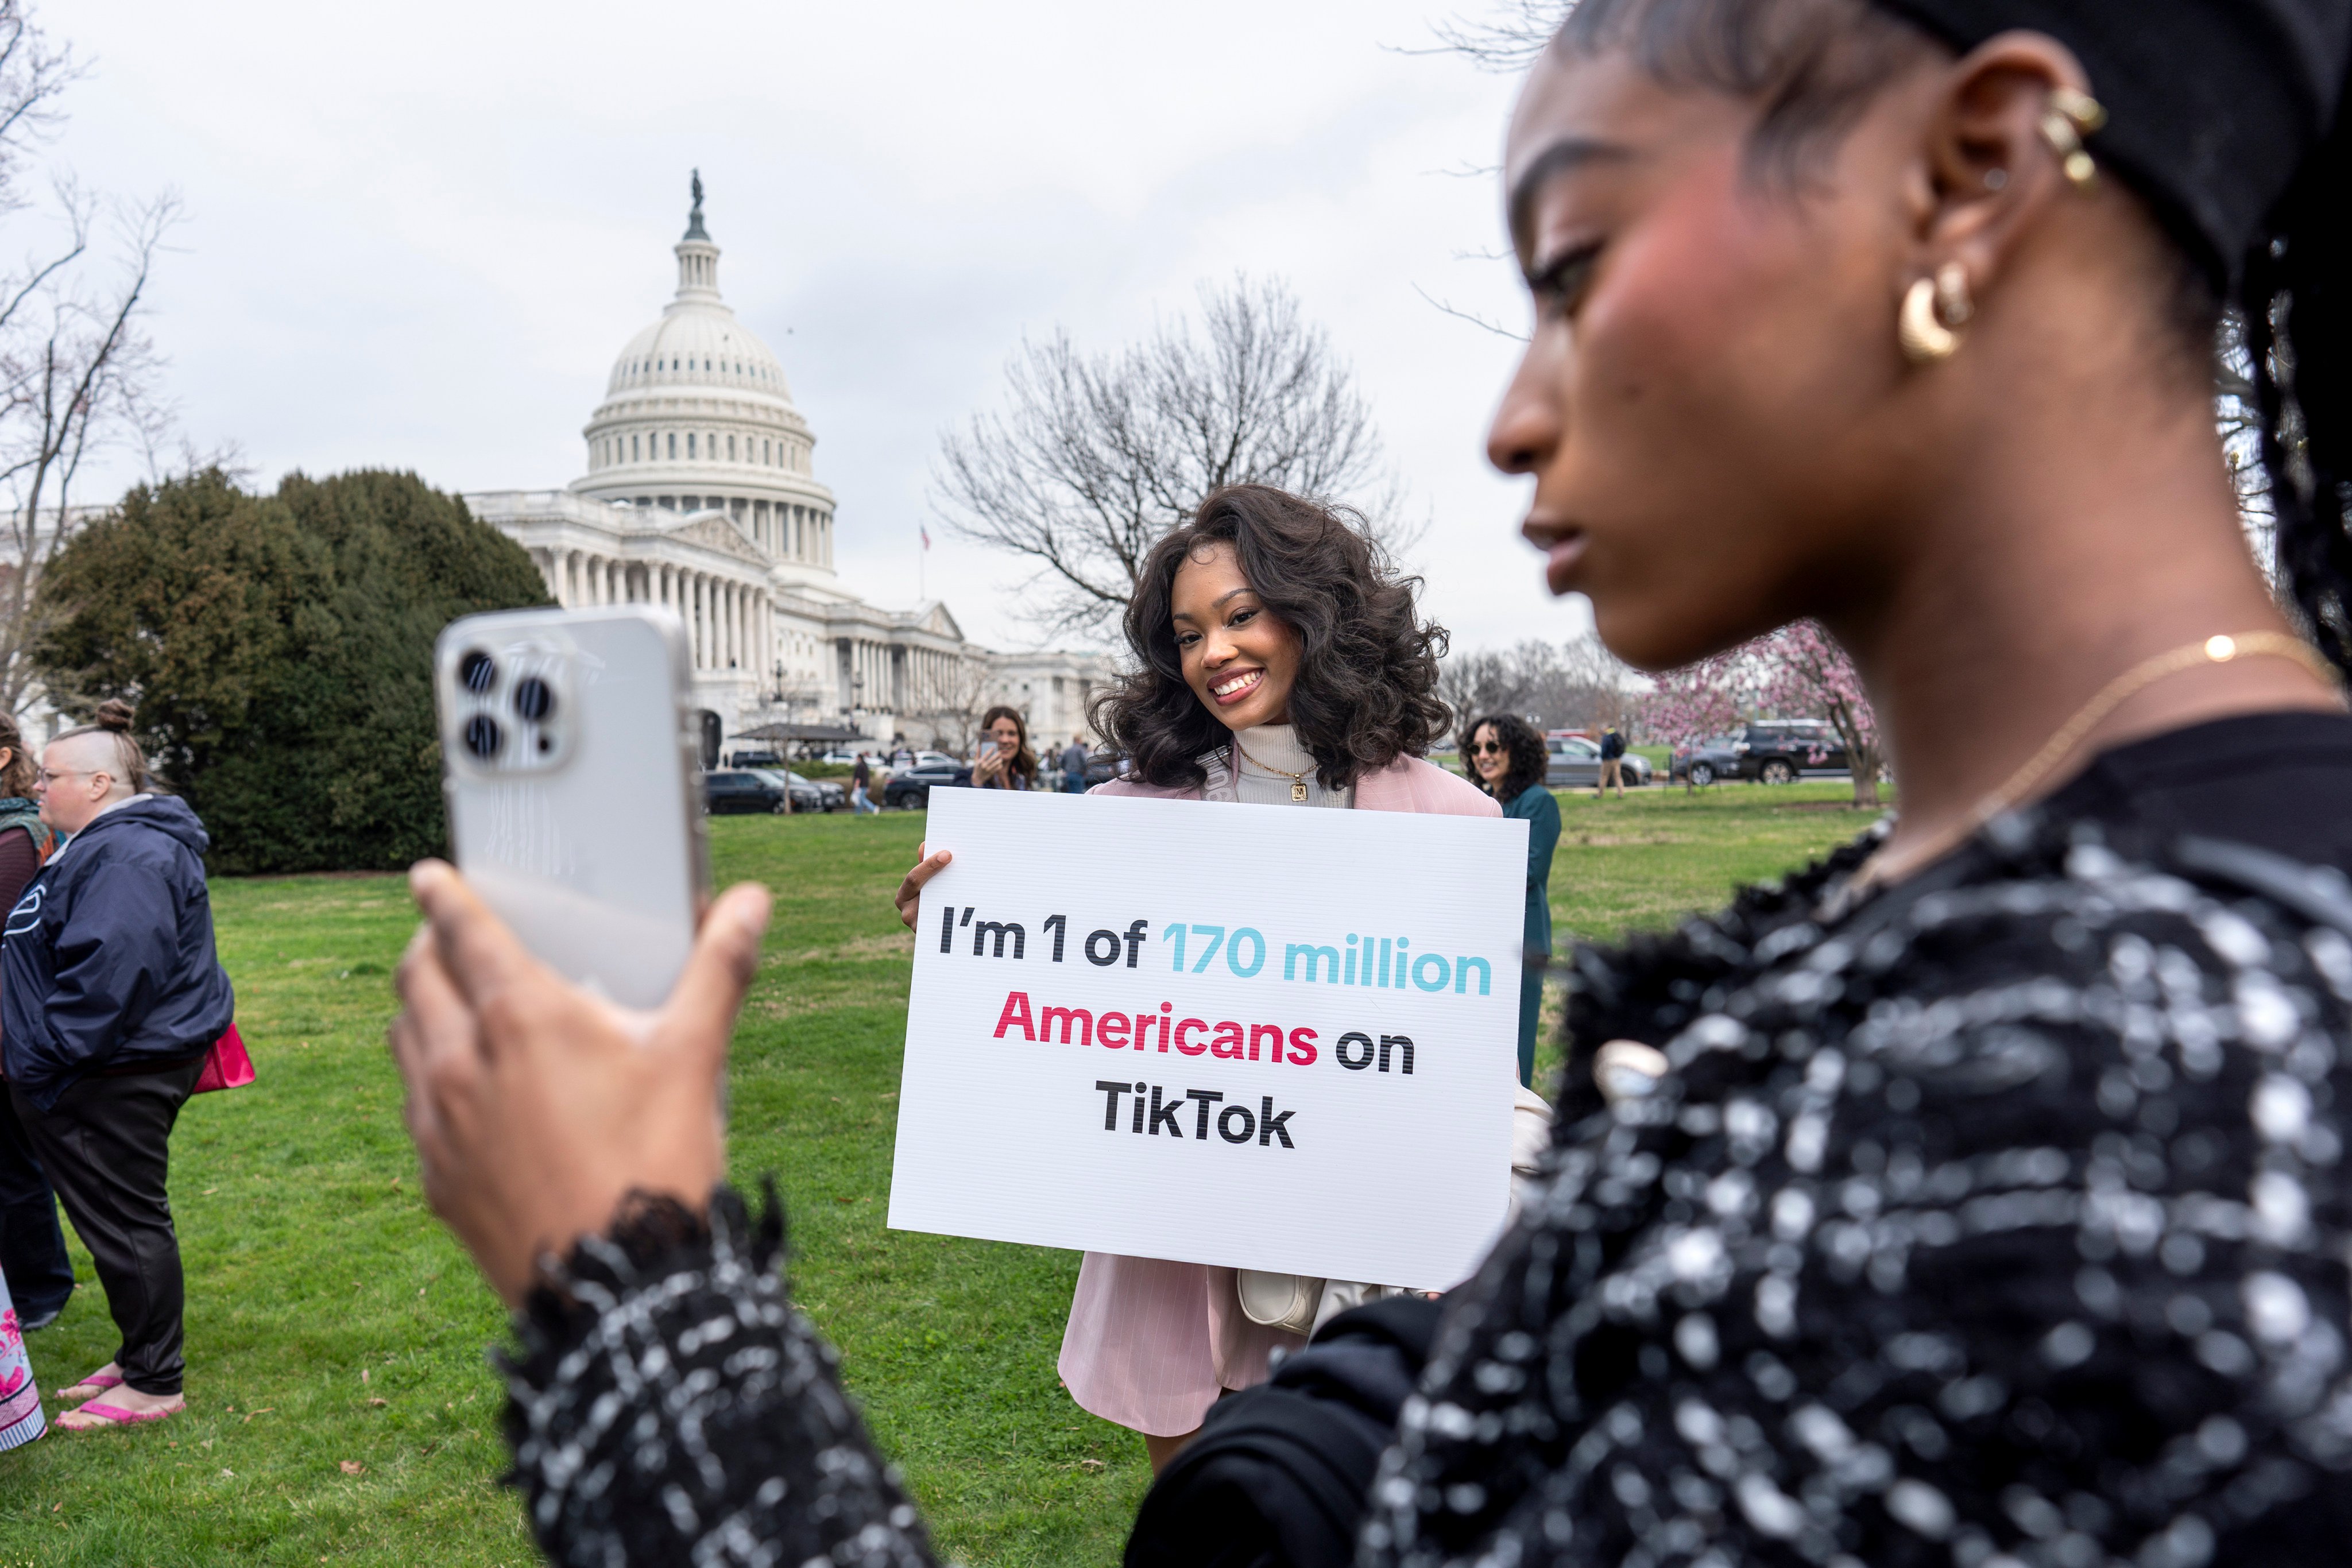 Two devotees of TikTok, Mona Swain (centre) and her sister  Rachel Swain (right), pose with a sign expressing their support at the US Capitol on March 13. Photo: AP